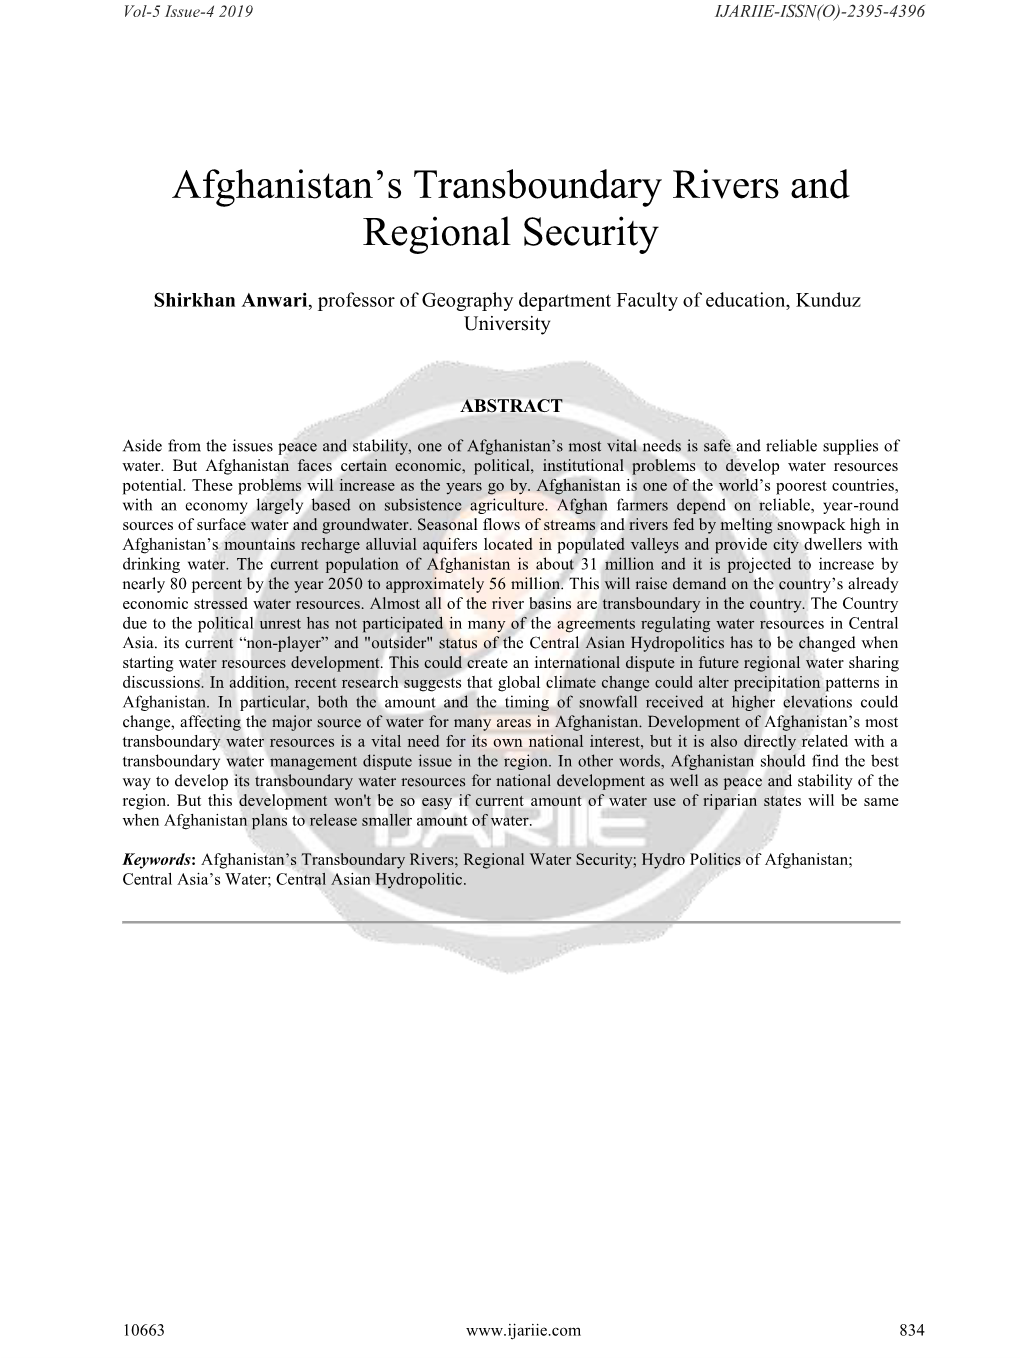 Afghanistan's Transboundary Rivers and Regional Security